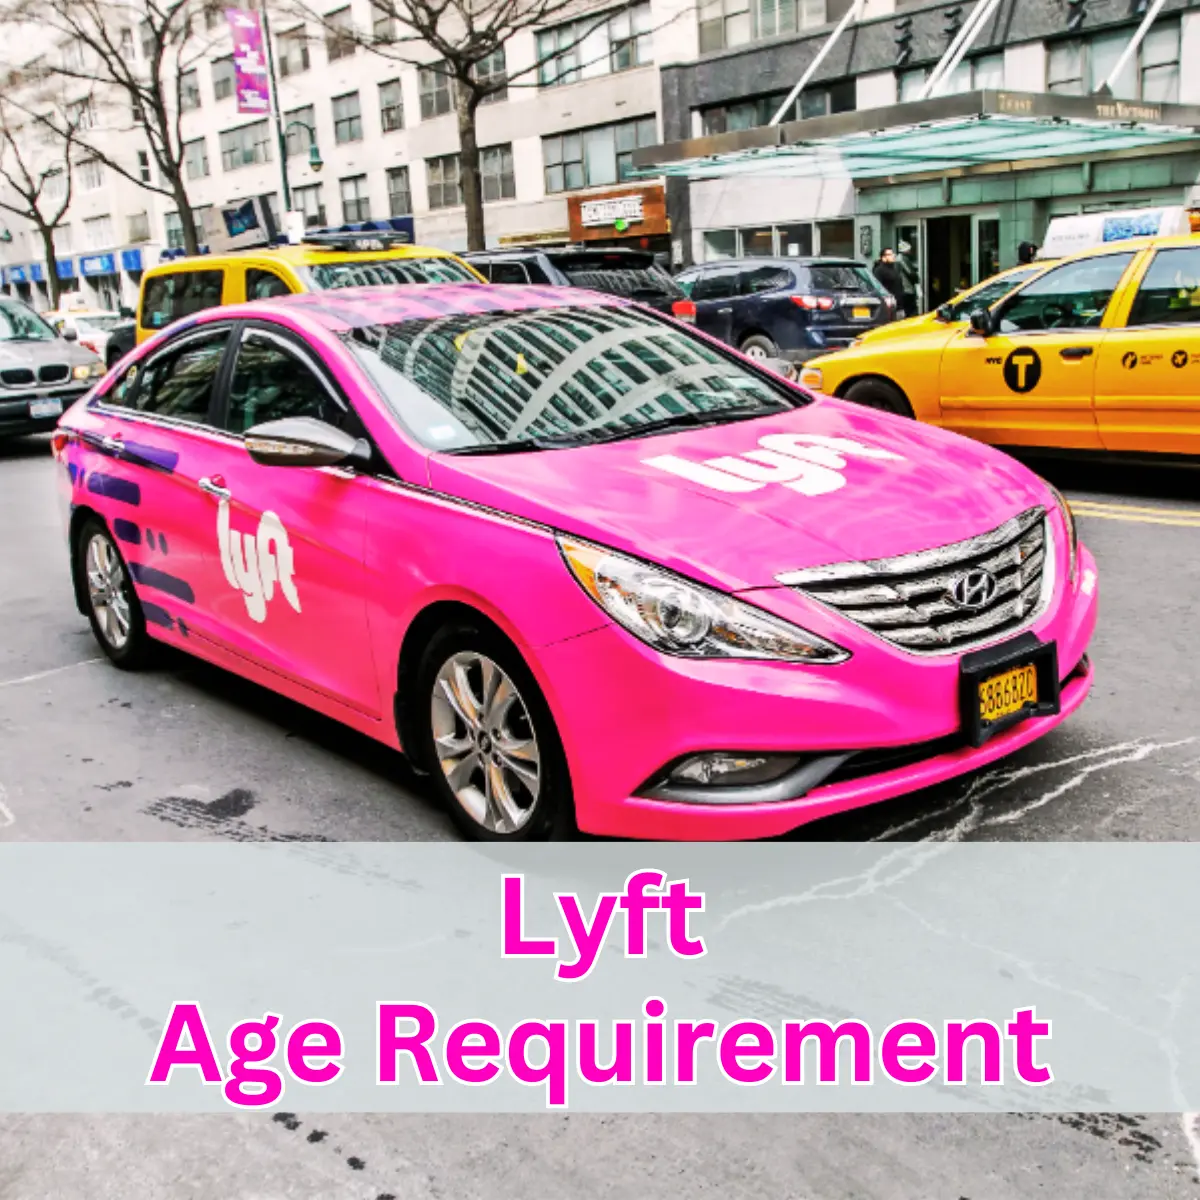 Lyft Age Requirement